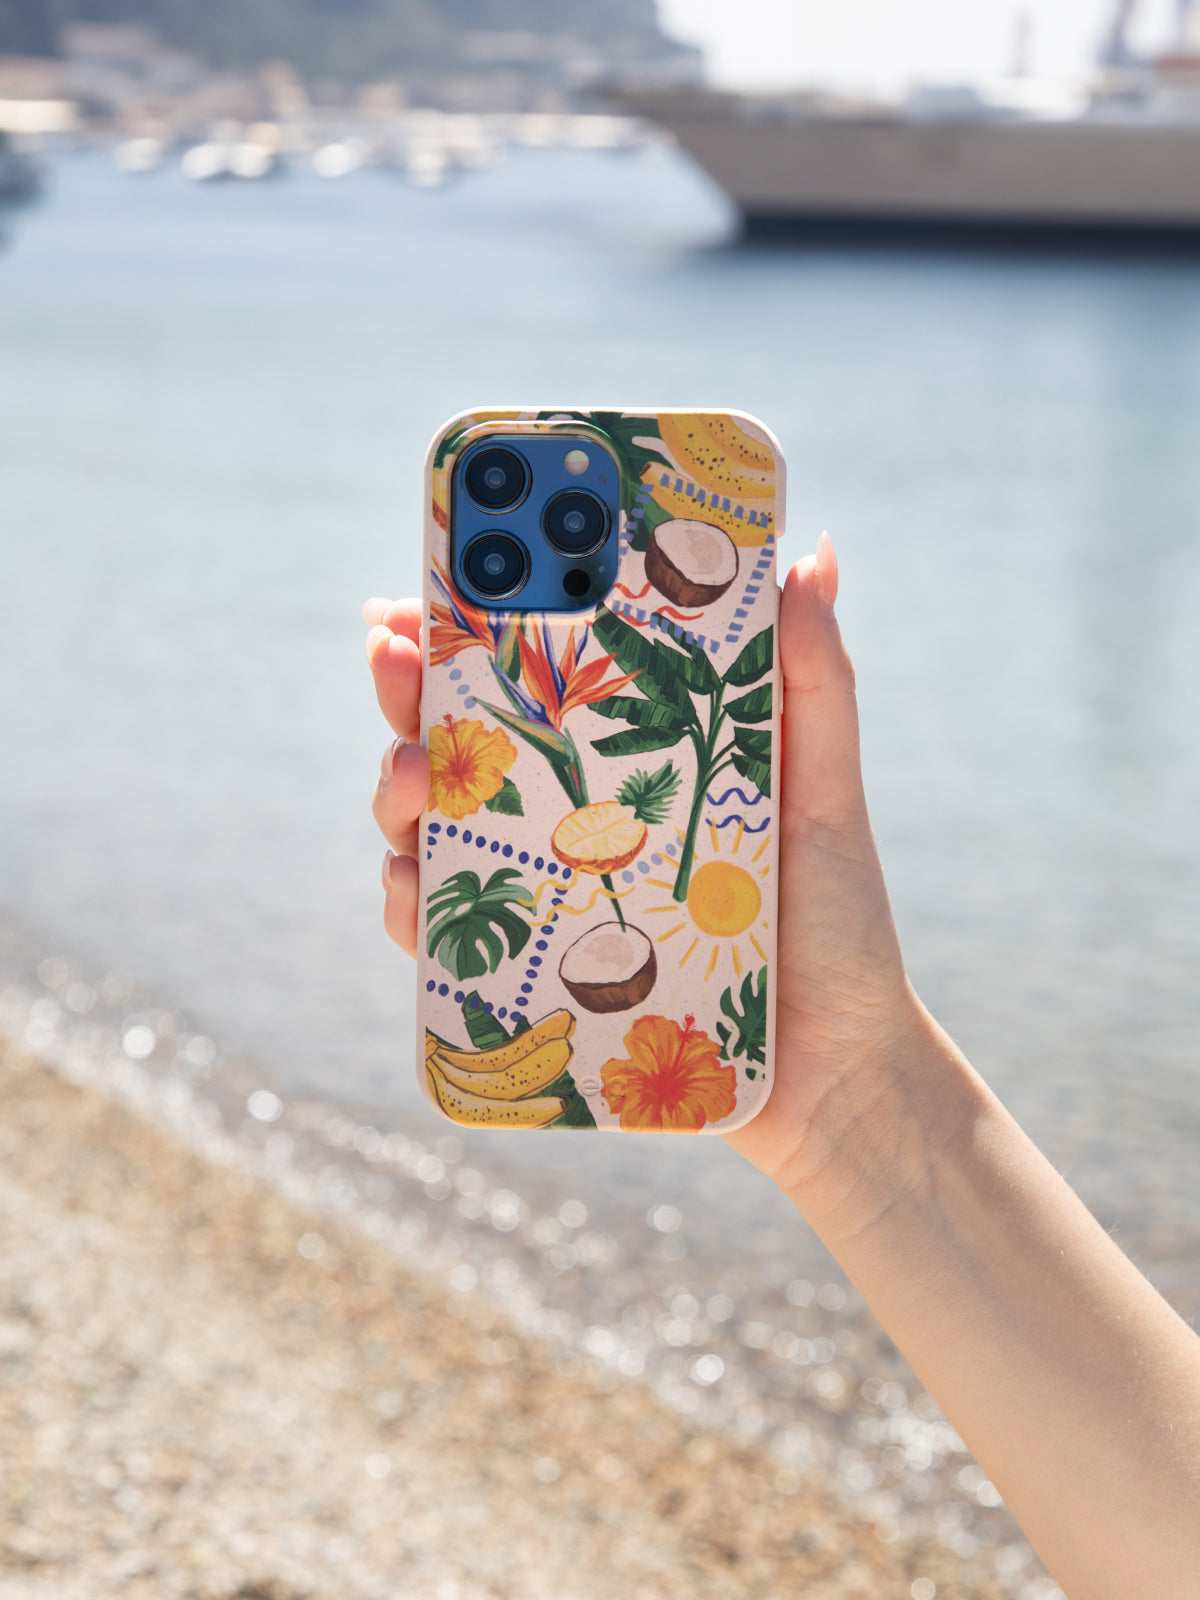 The phone case featured in the image is the Pela Tropics Phone Case from the Summer Travel Collection, held in a hand against a scenic seaside background with boats and a rocky shoreline in the distance. The case design includes tropical elements such as bananas, coconuts, and vibrant flowers.